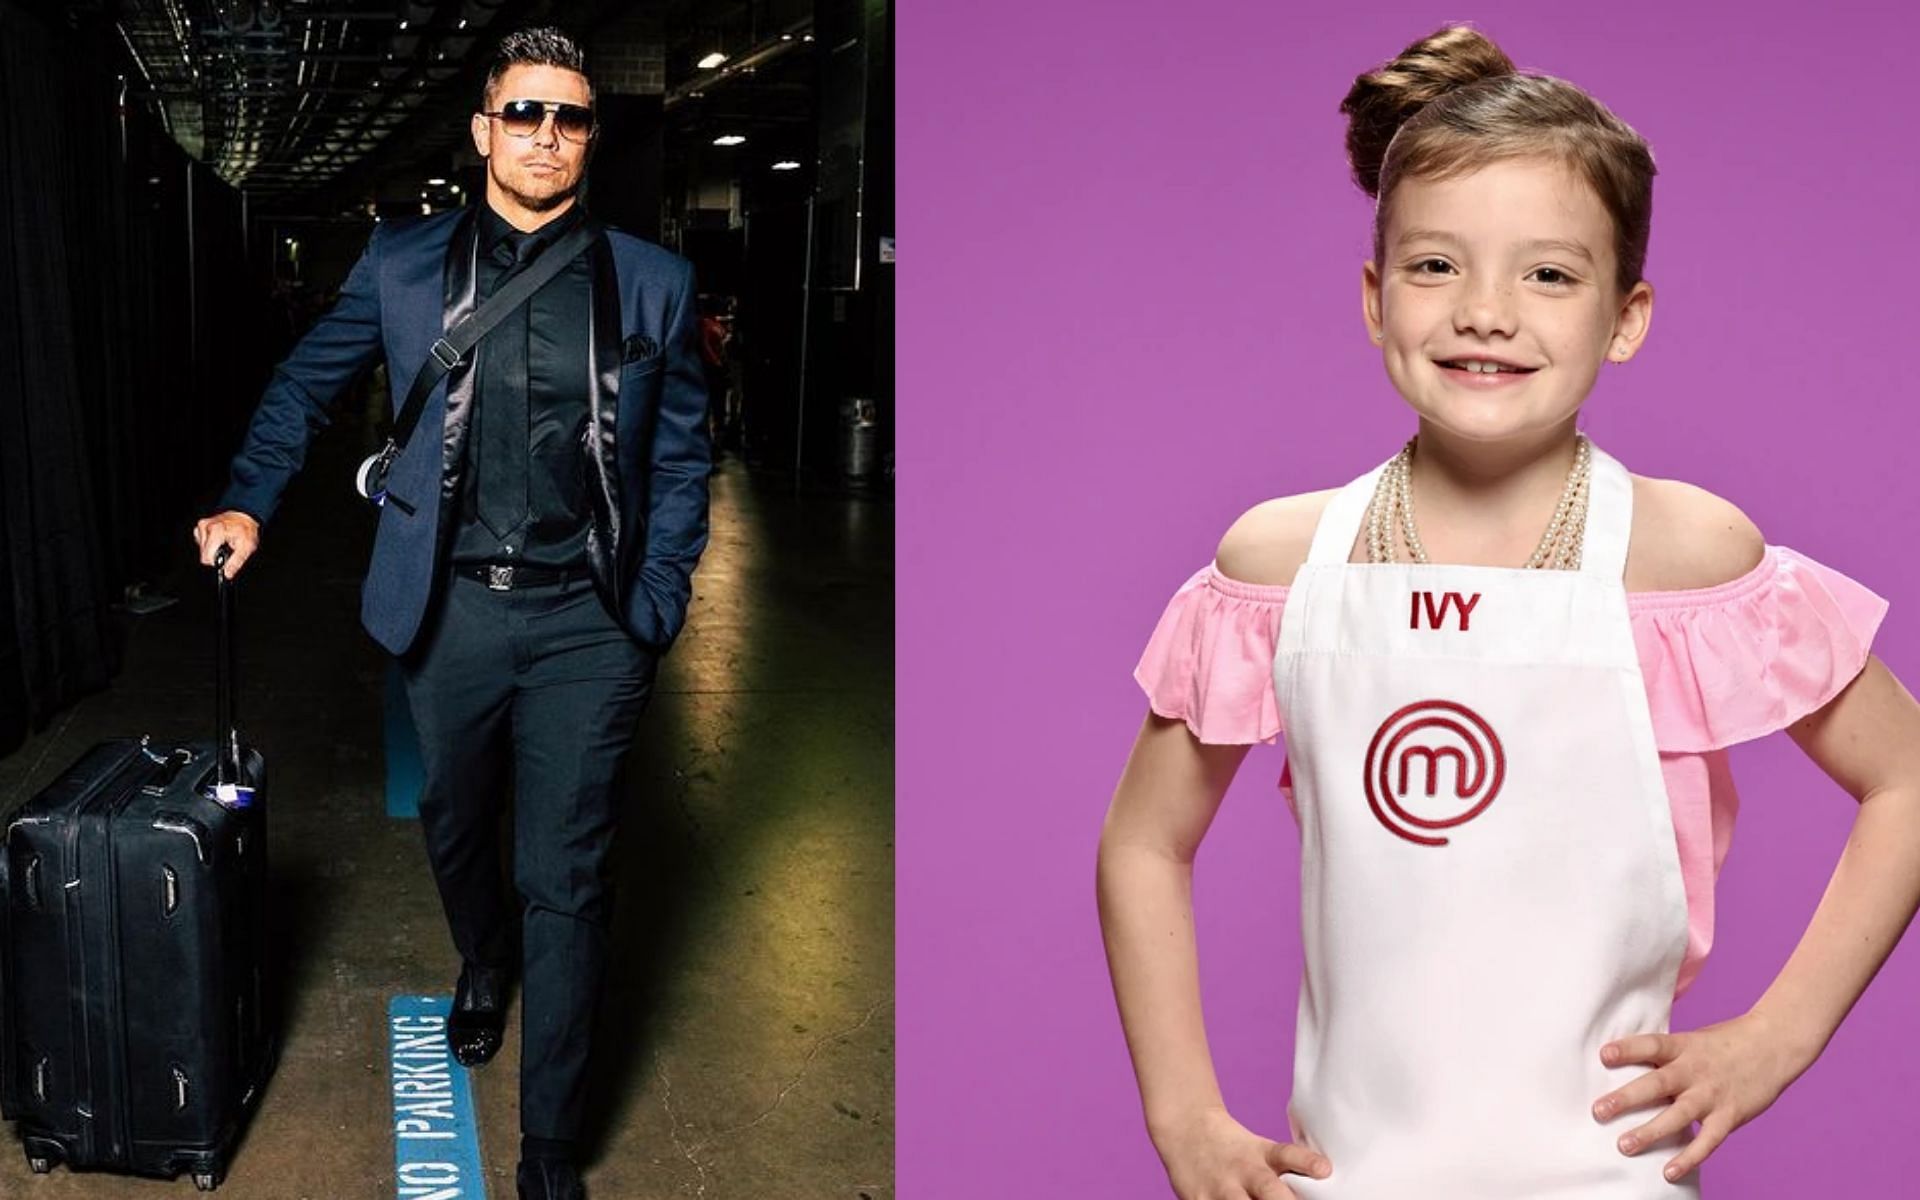 Ivy Childs and The Miz teamed up tonight for a challenge (Images via mikethemiz/Instagram and masterchef.fandom)